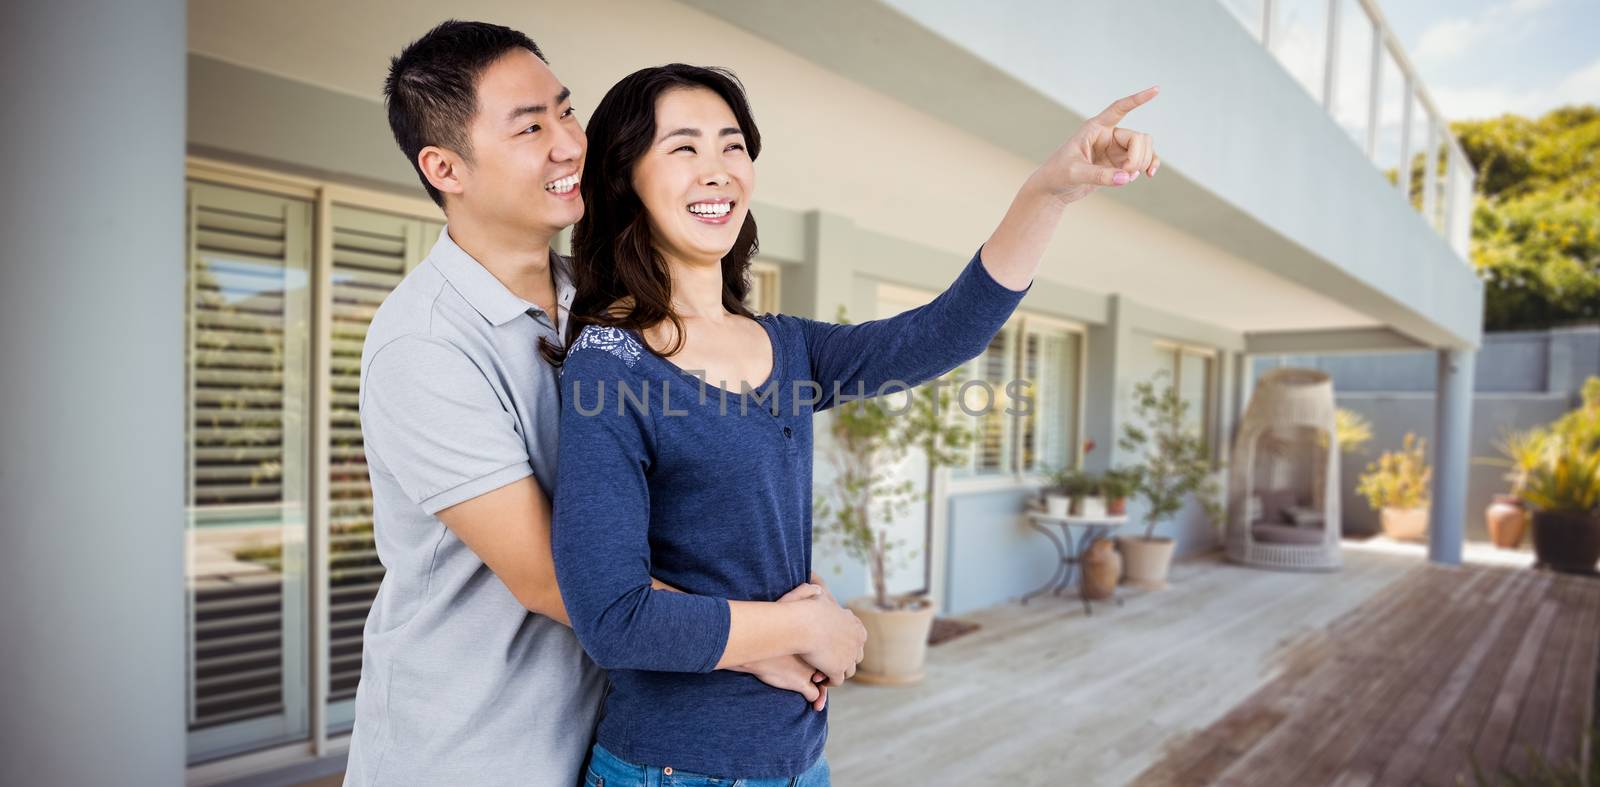 Happy couple with woman pointing up against stylish outdoor patio area